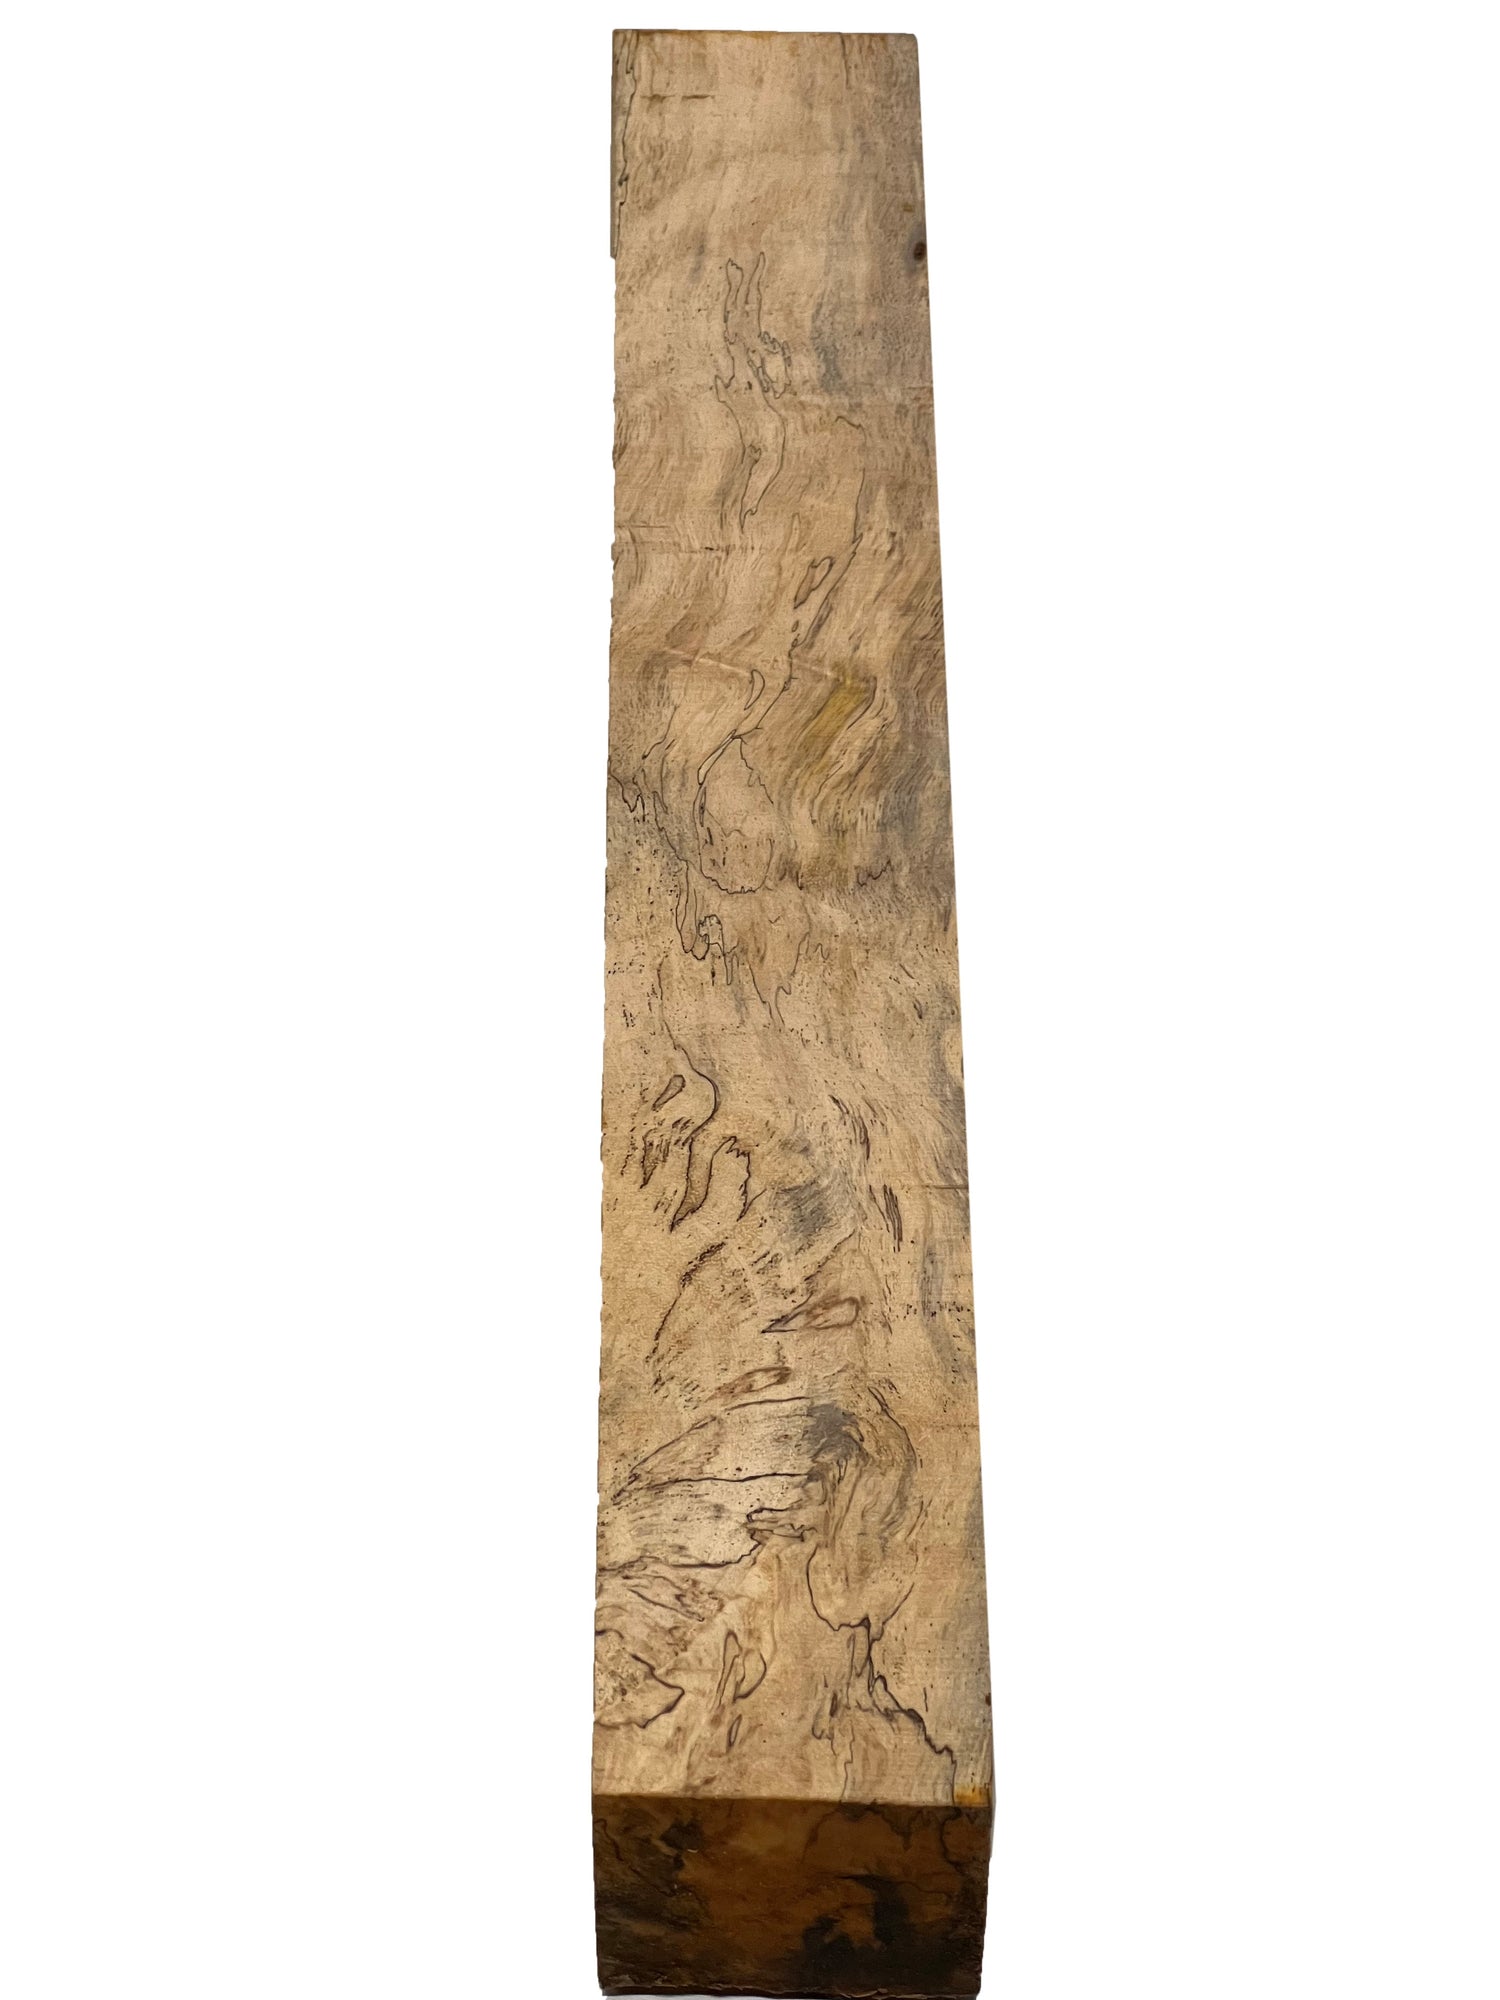 Combo Pack 5,Yellow Tamarind Turning Blanks 24” x 2” x 2” - Exotic Wood Zone - Buy online Across USA 